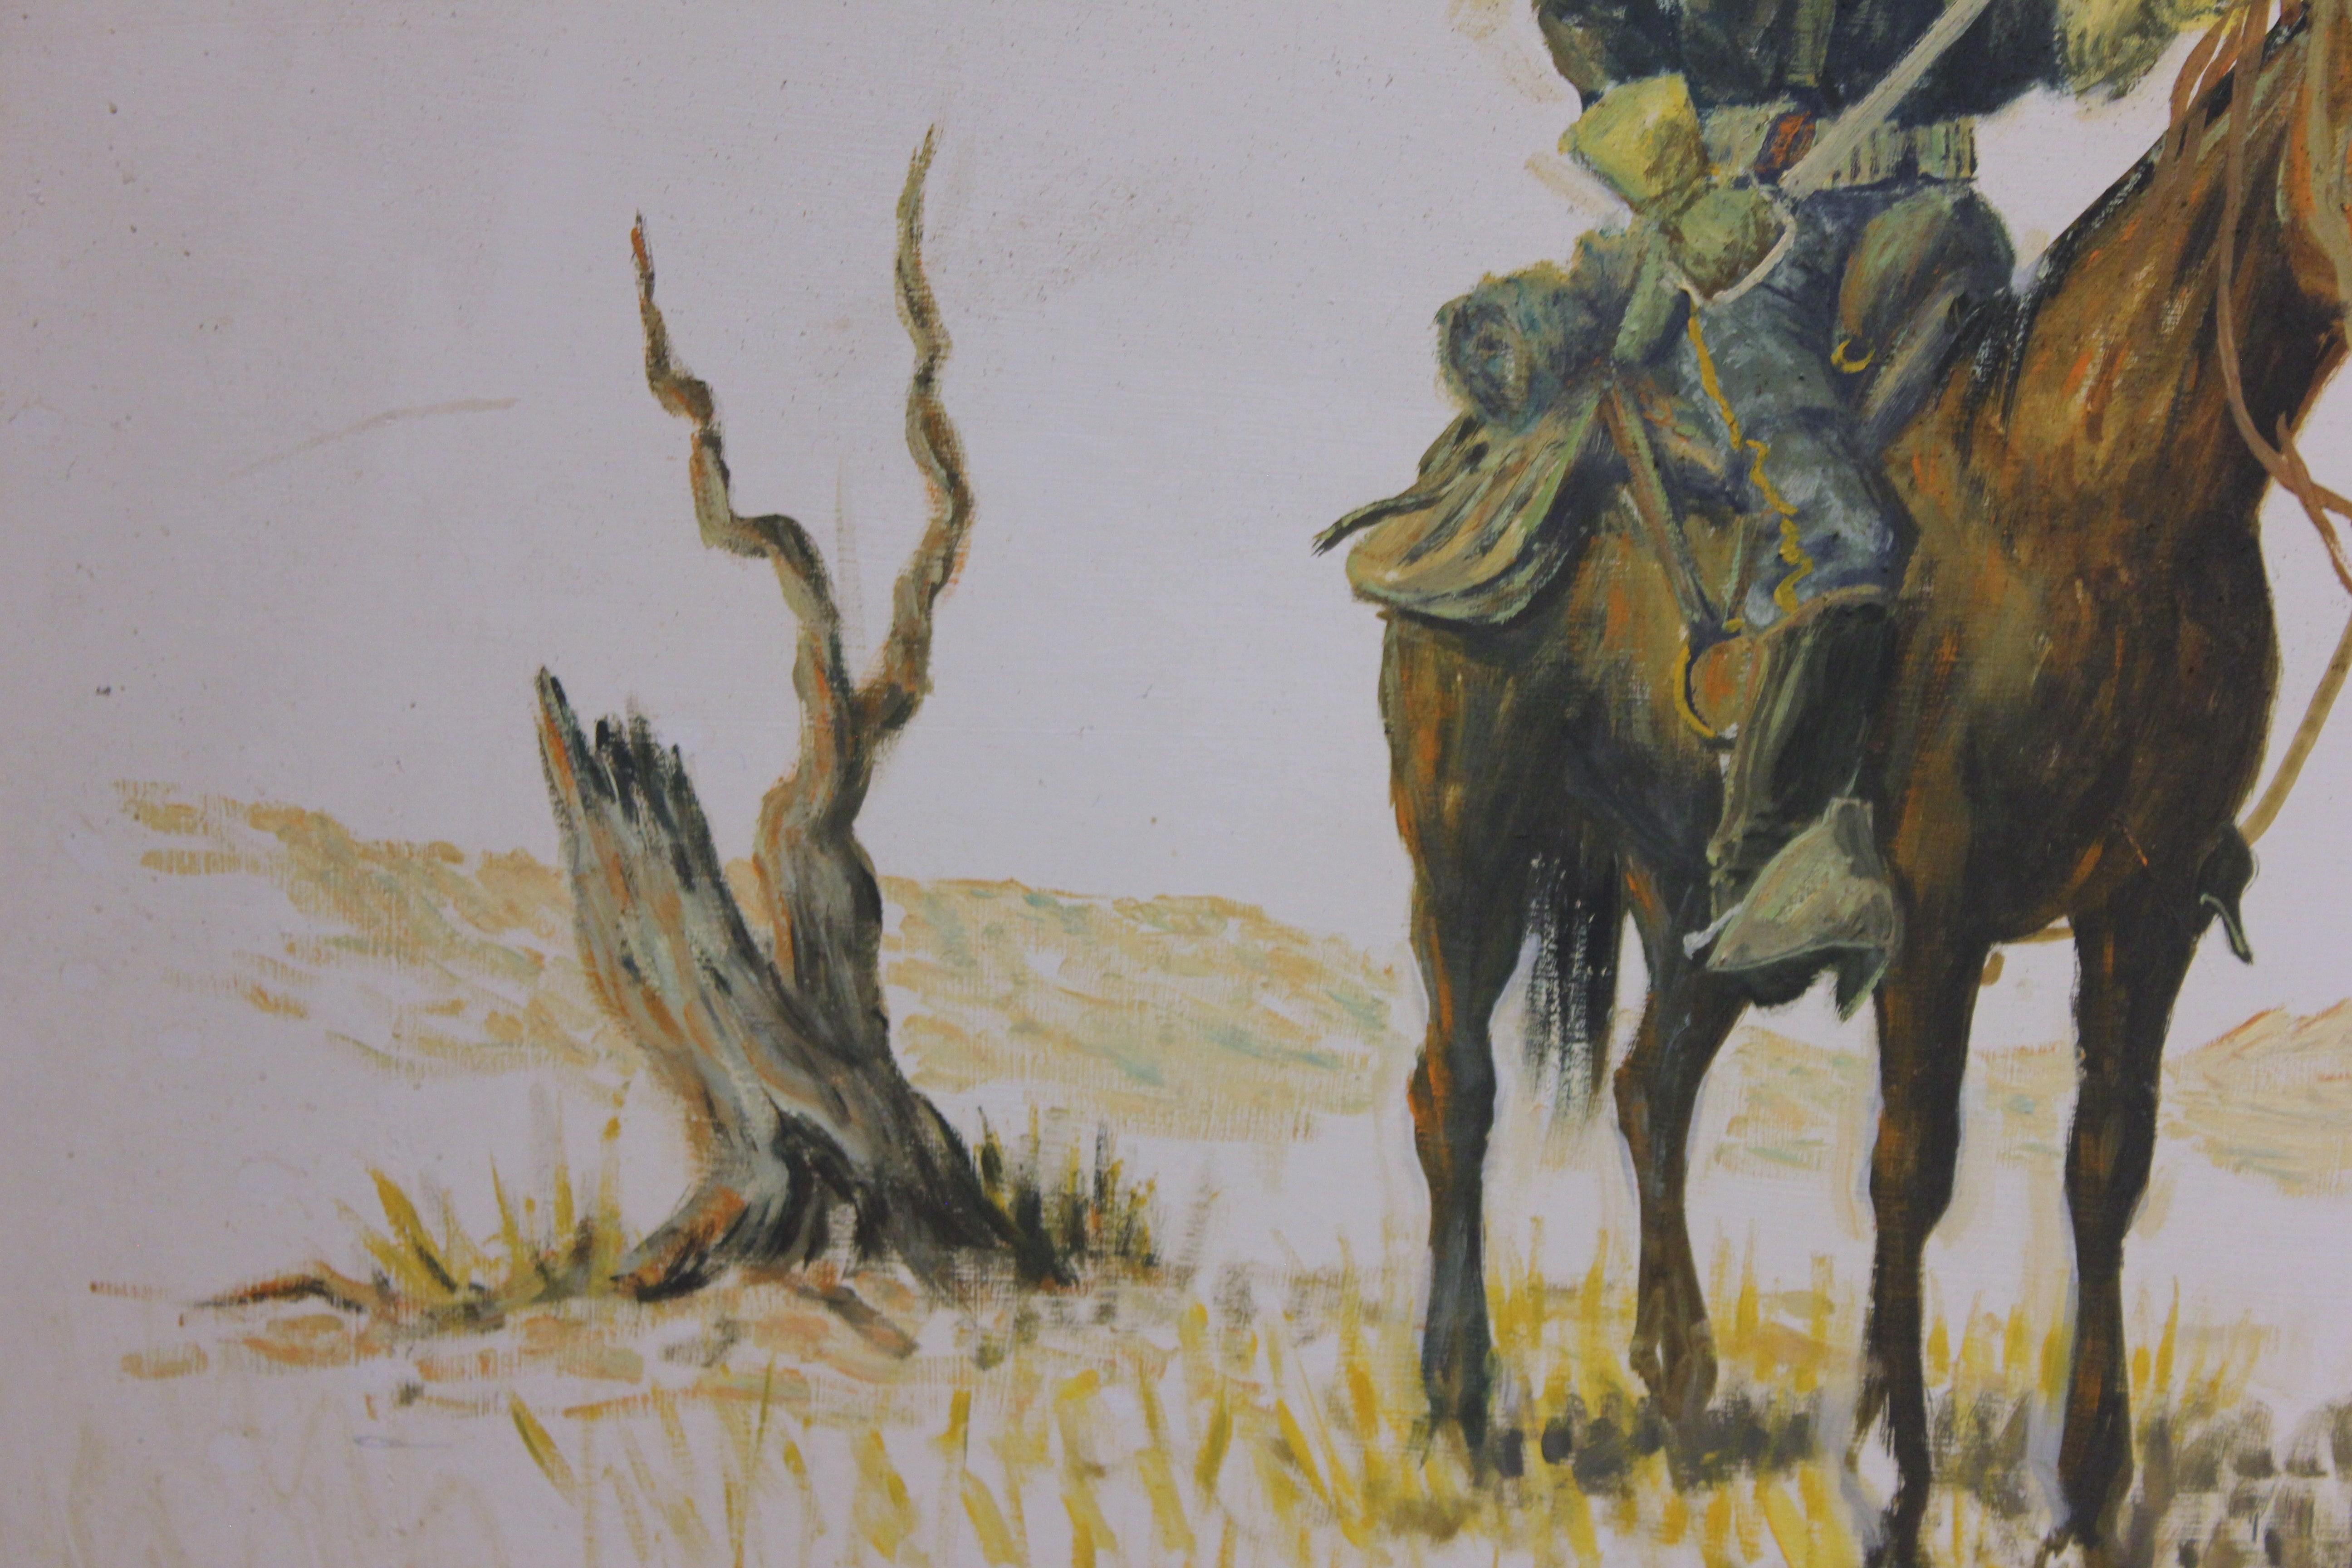 Naturalistic Union Soldier on Horseback - Painting by Bud Breen